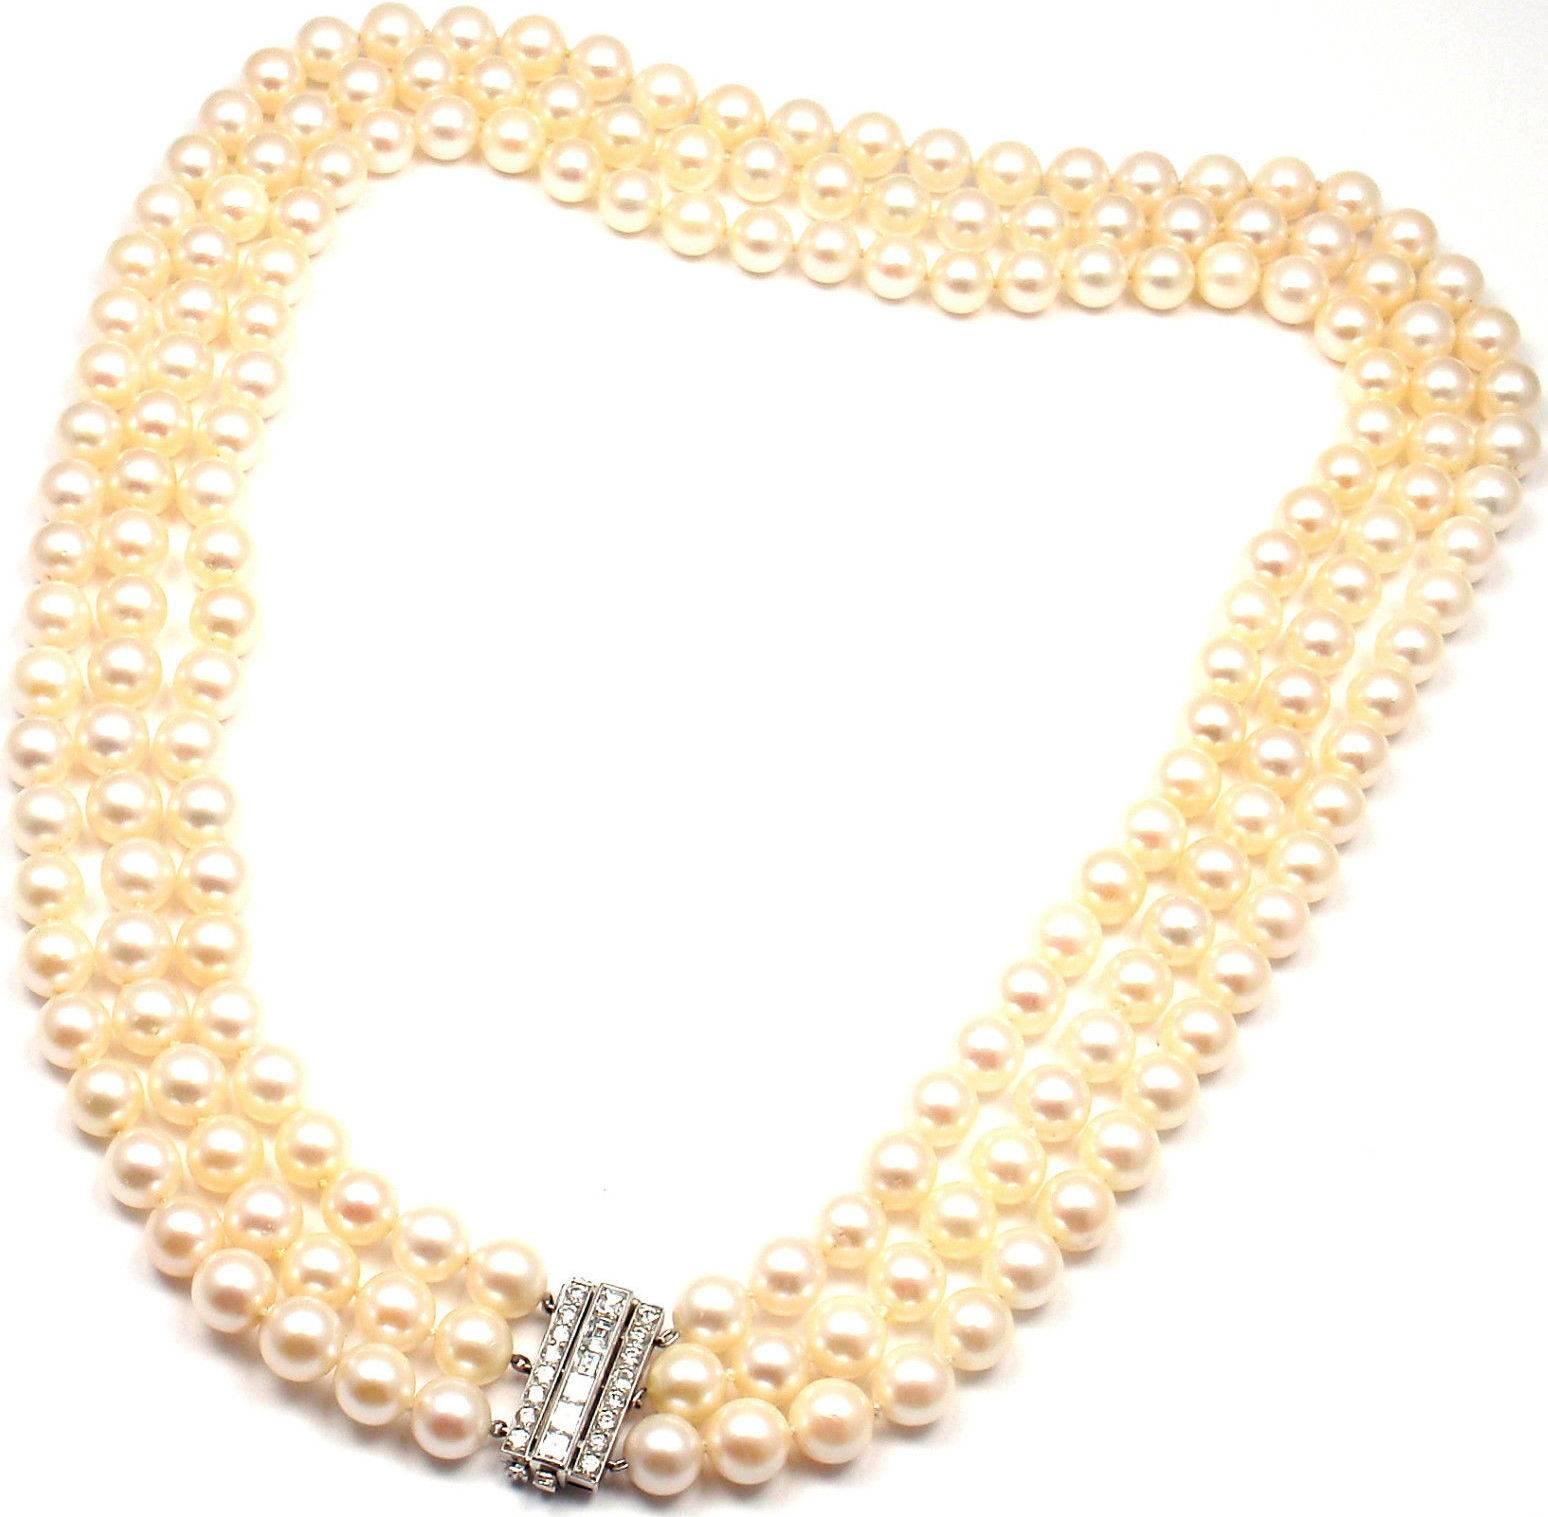 Platinum Diamond & Triple Straned Cultured Pearl Necklace by 
Tiffany & Co. 
With 22 diamonds VS1 clarity, E color total weight approx. 2ct 
179 cultured pearls 8mm - 7.5mm

Details:
Measurements:
Necklace Length: 18